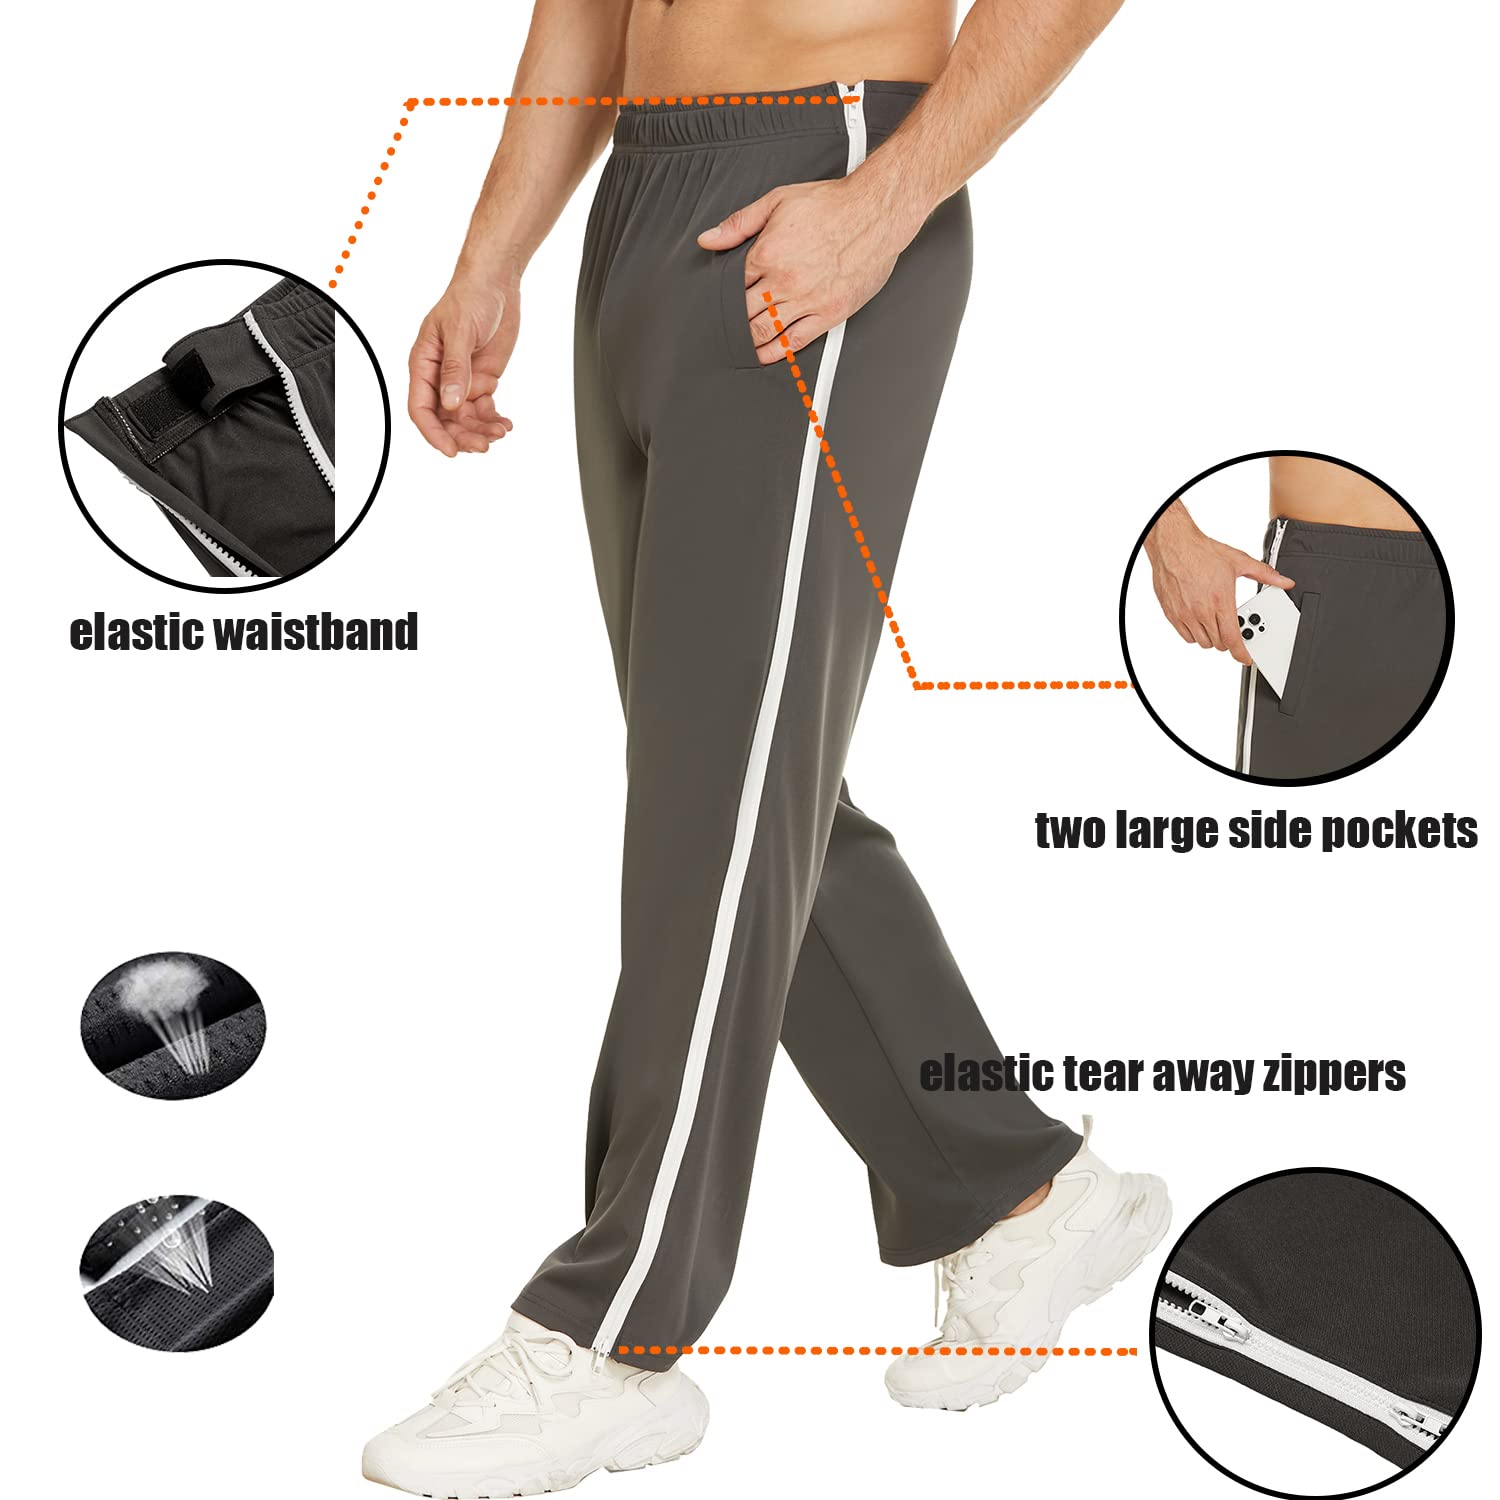 Post Surgery Tearaway Pants | Best Pants for Surgery Recovery